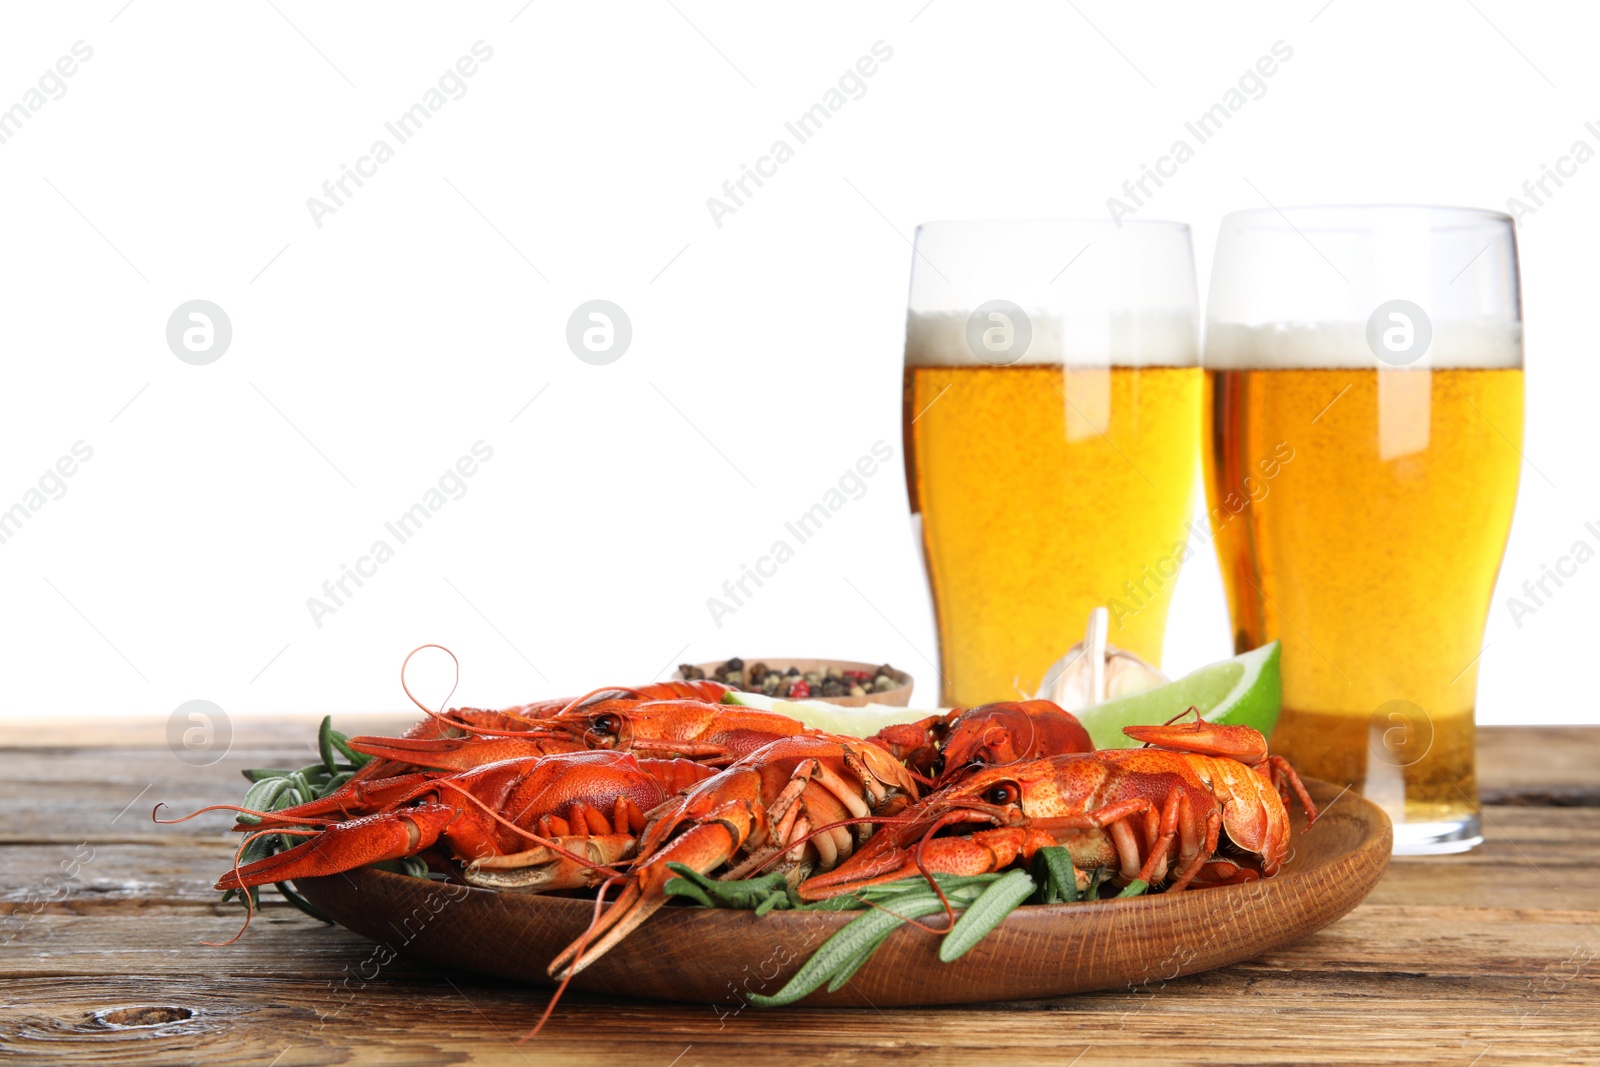 Photo of Delicious red boiled crayfishes and beer on wooden table against white background